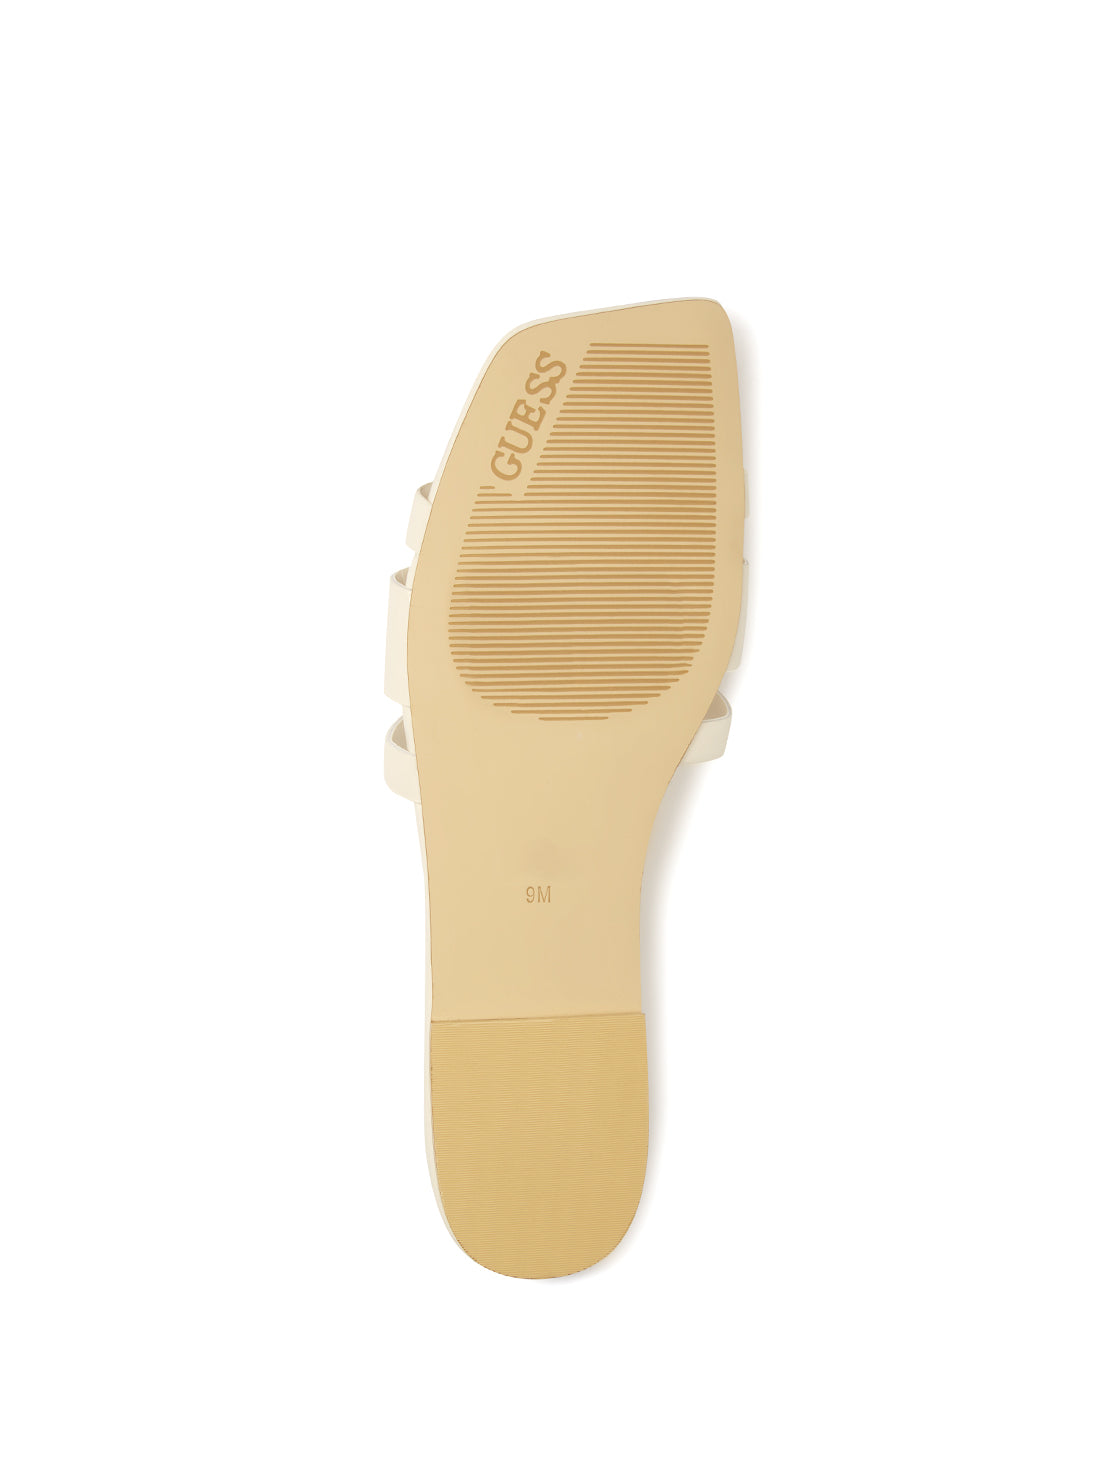 GUESS Women's Ivory Caffy Sandals CAFFY Bottom View